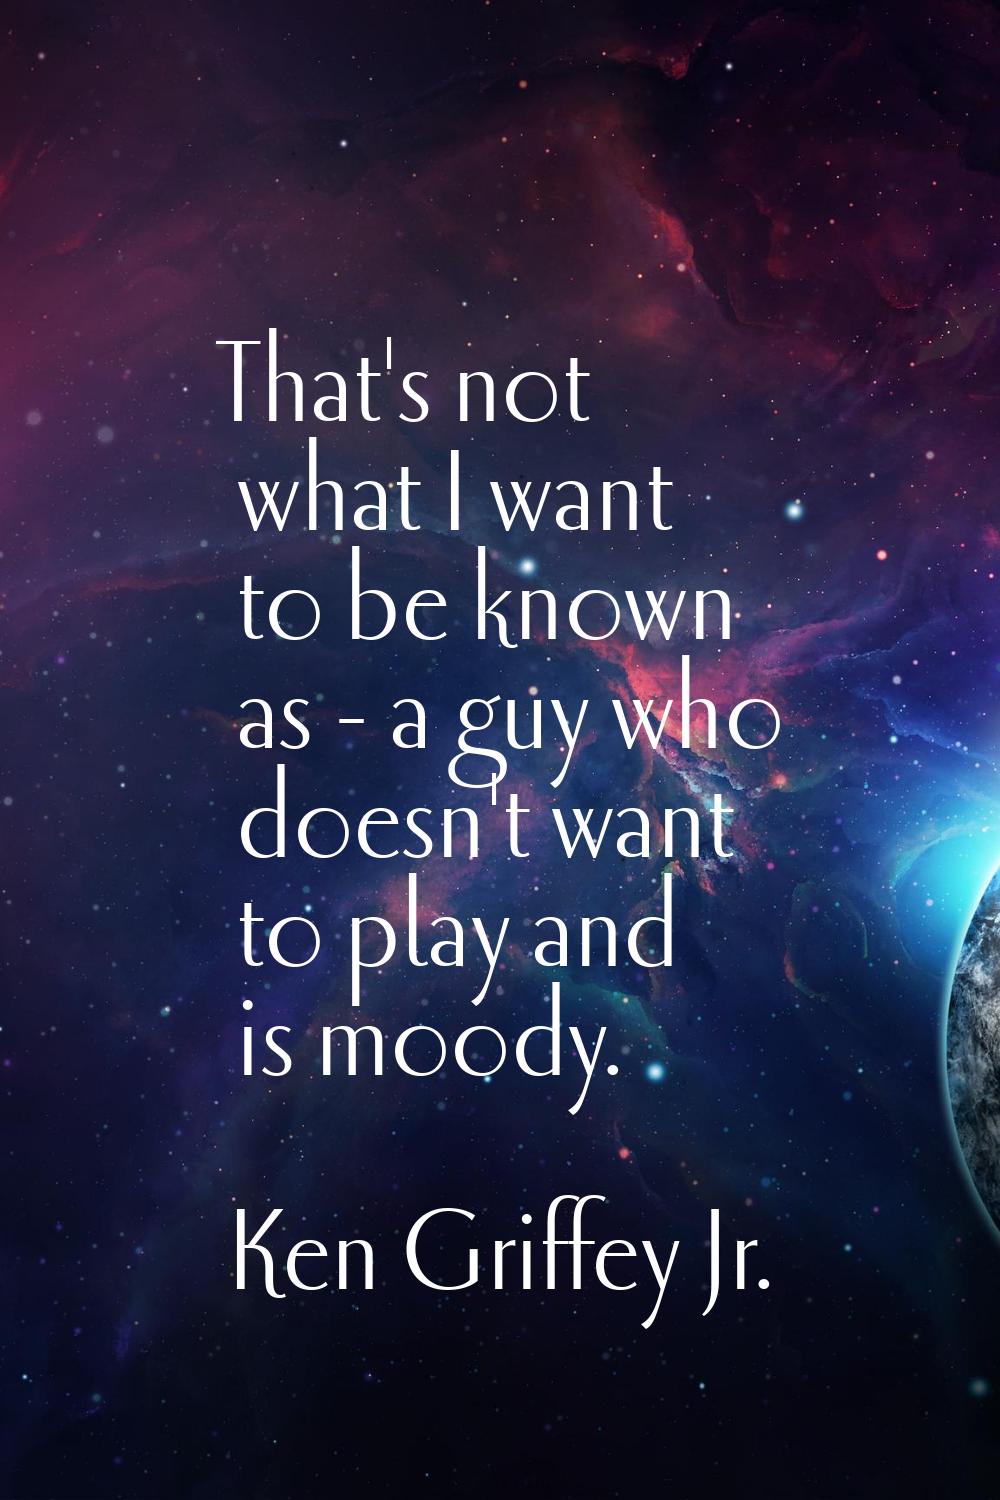 That's not what I want to be known as - a guy who doesn't want to play and is moody.